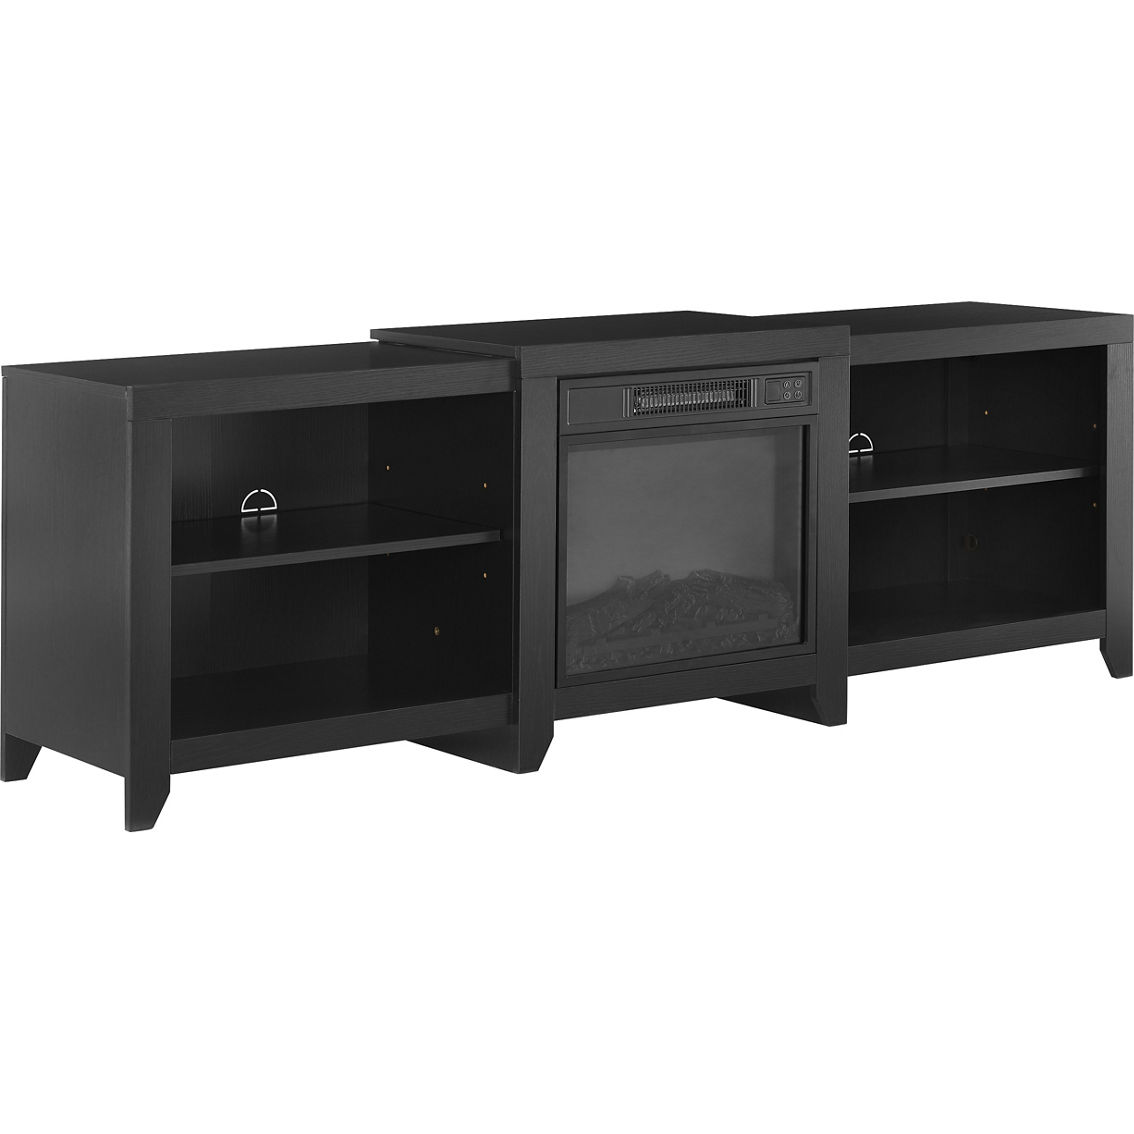 Crosley Furniture Ronin Low Profile TV Stand with Fireplace 69 in. - Image 2 of 6